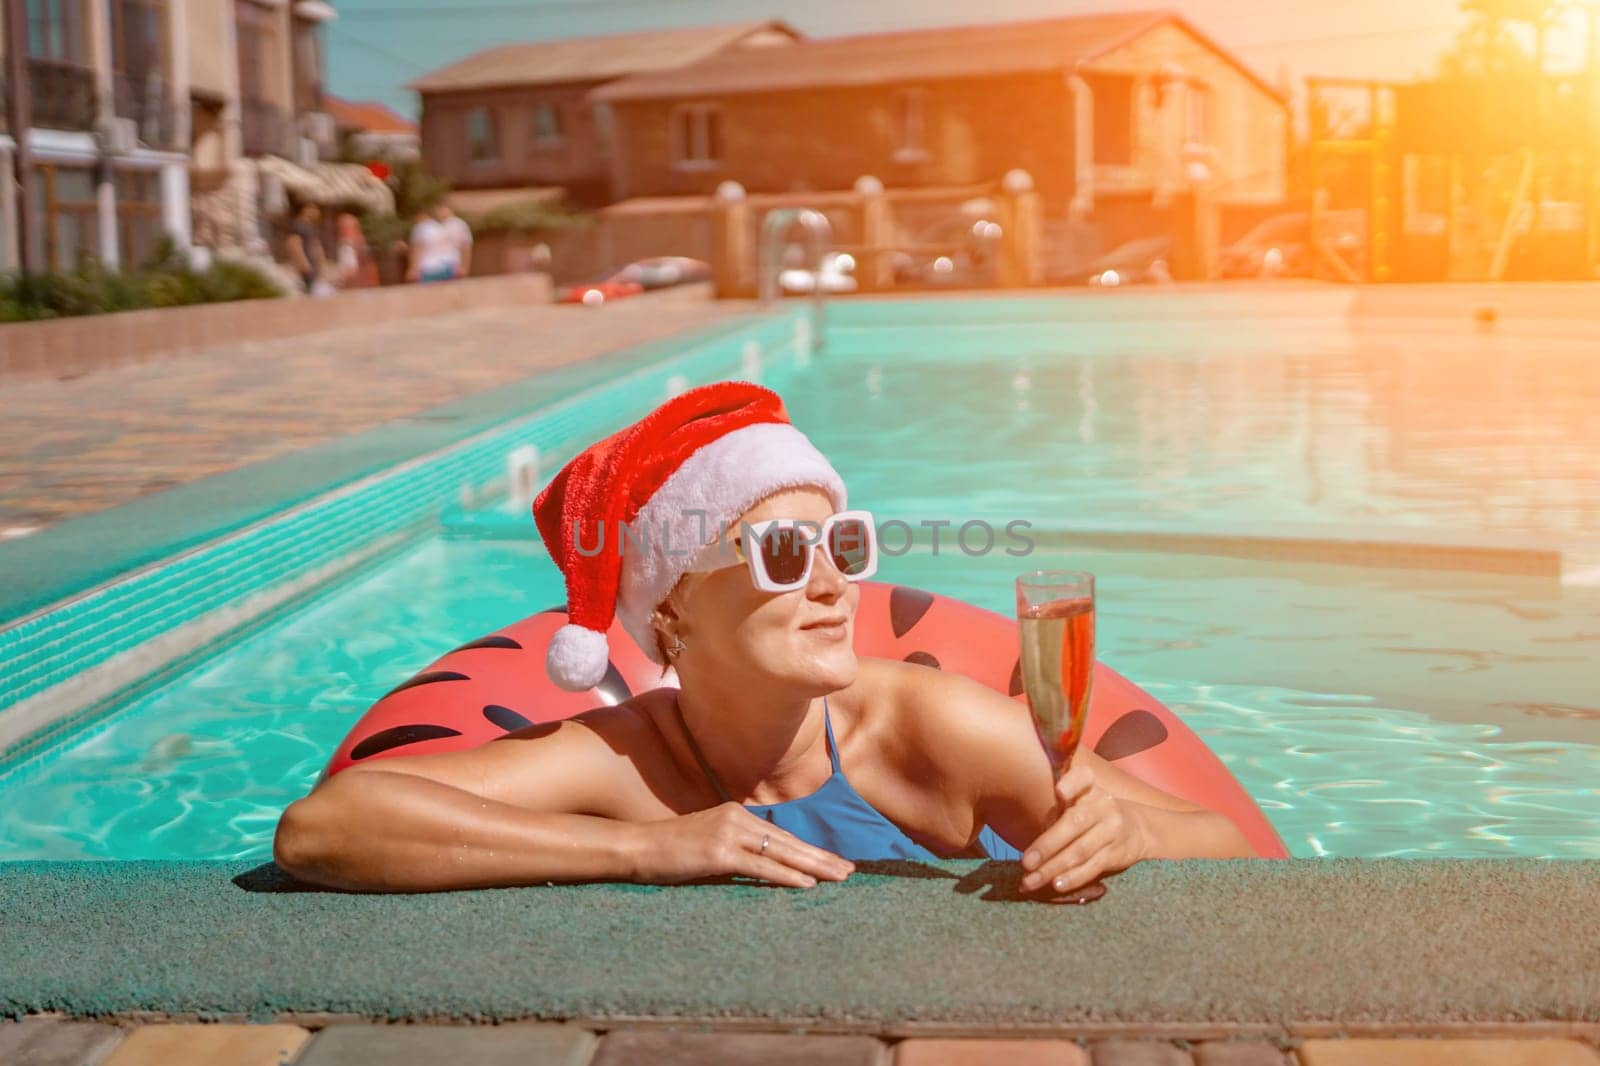 Woman pool Santa hat. A happy woman in a blue bikini, a red and white Santa hat and sunglasses poses near the pool with a glass of champagne standing nearby. Christmas holidays concept. by Matiunina